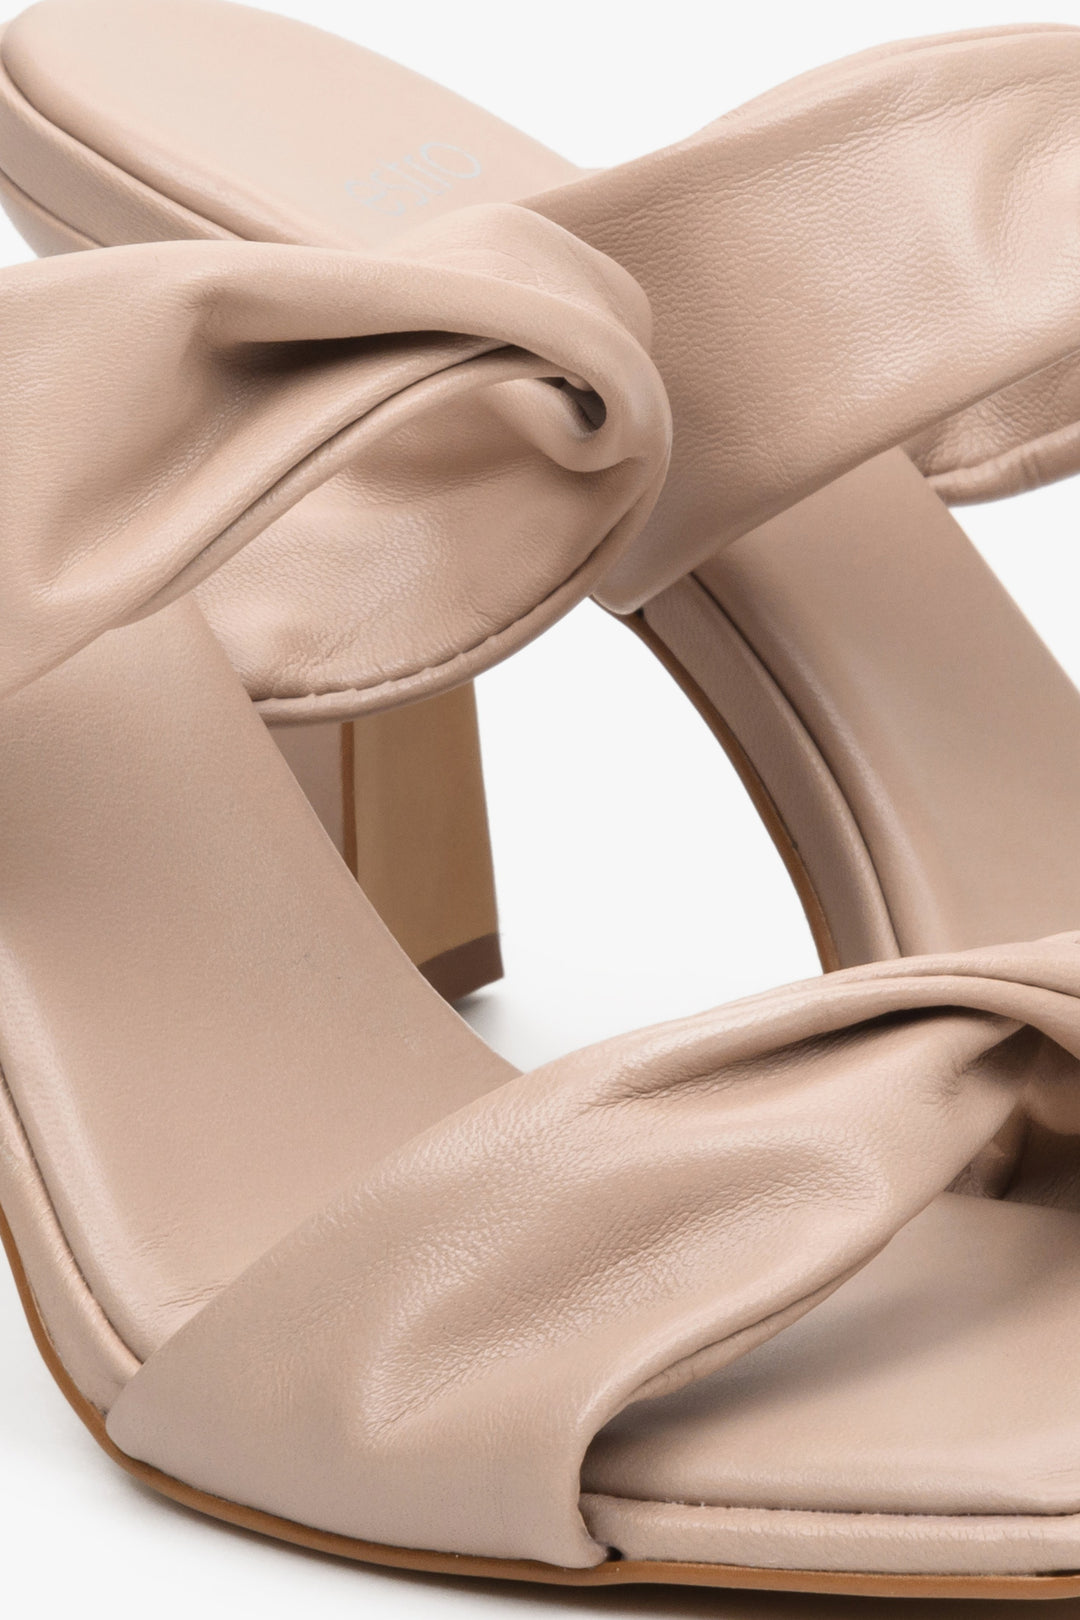 Women's beige leather heeled sandals by Estro - close-up on details.